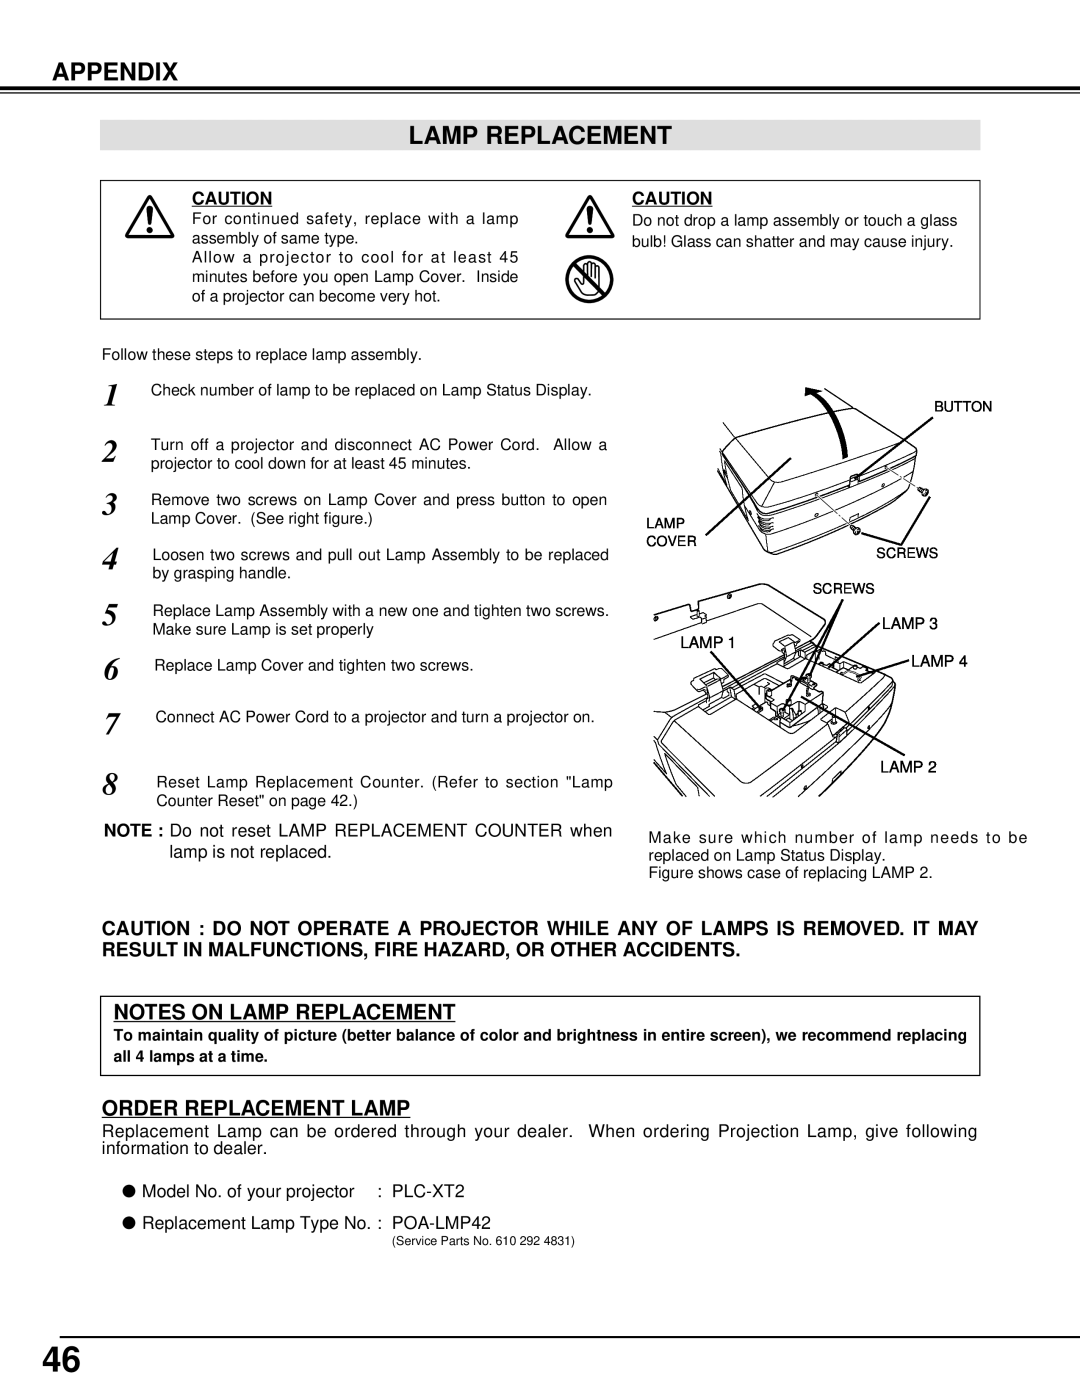 Eiki LC-XT2 instruction manual Appendix Lamp Replacement, Notes On Lamp Replacement, Order Replacement Lamp 